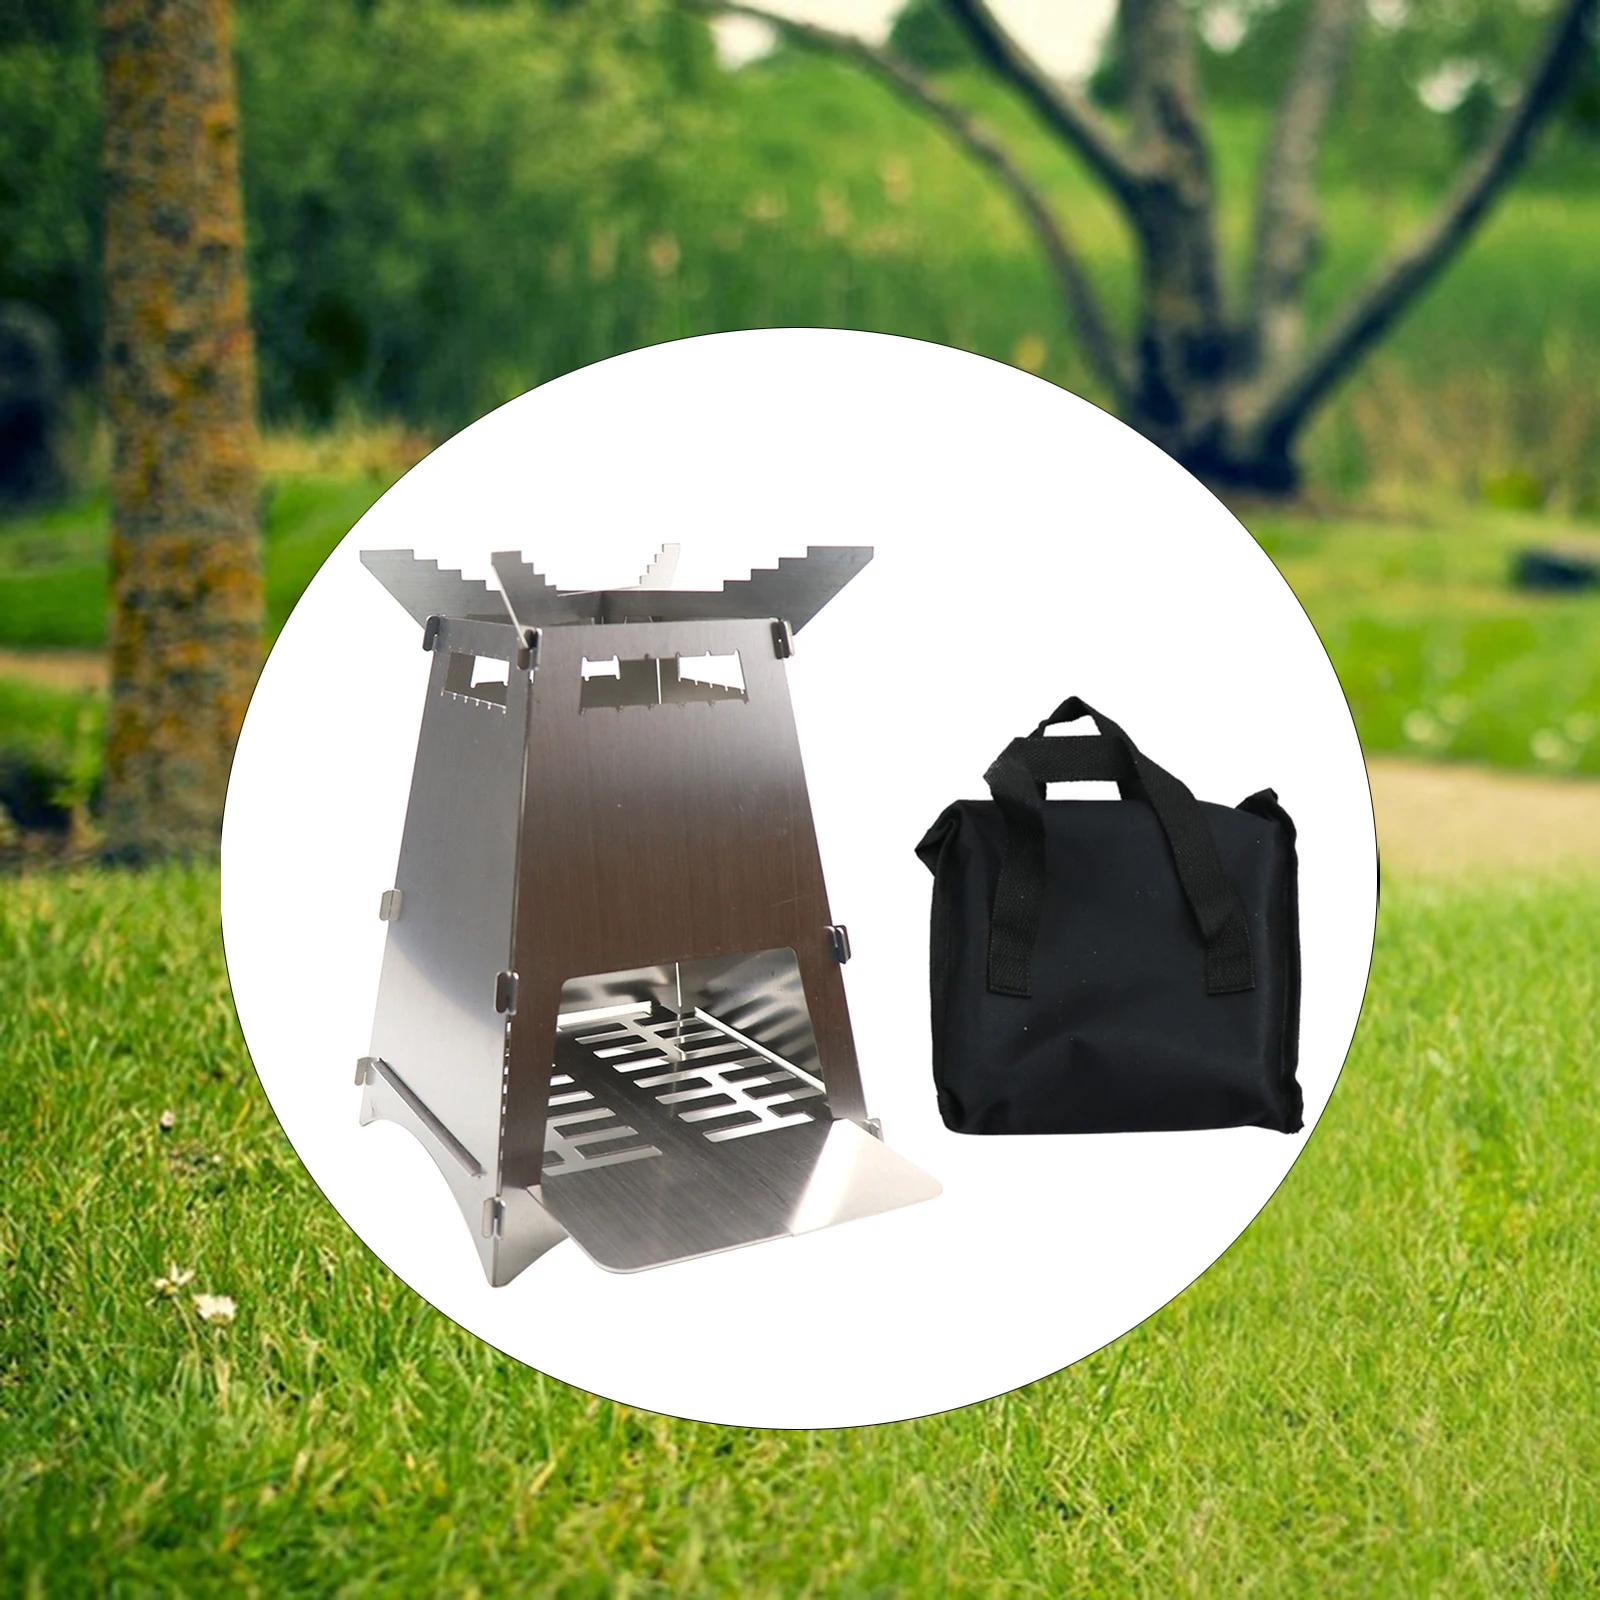 Collapsible Wood Stove Camping Picnic Backpacking Outdoor with Carry Bag